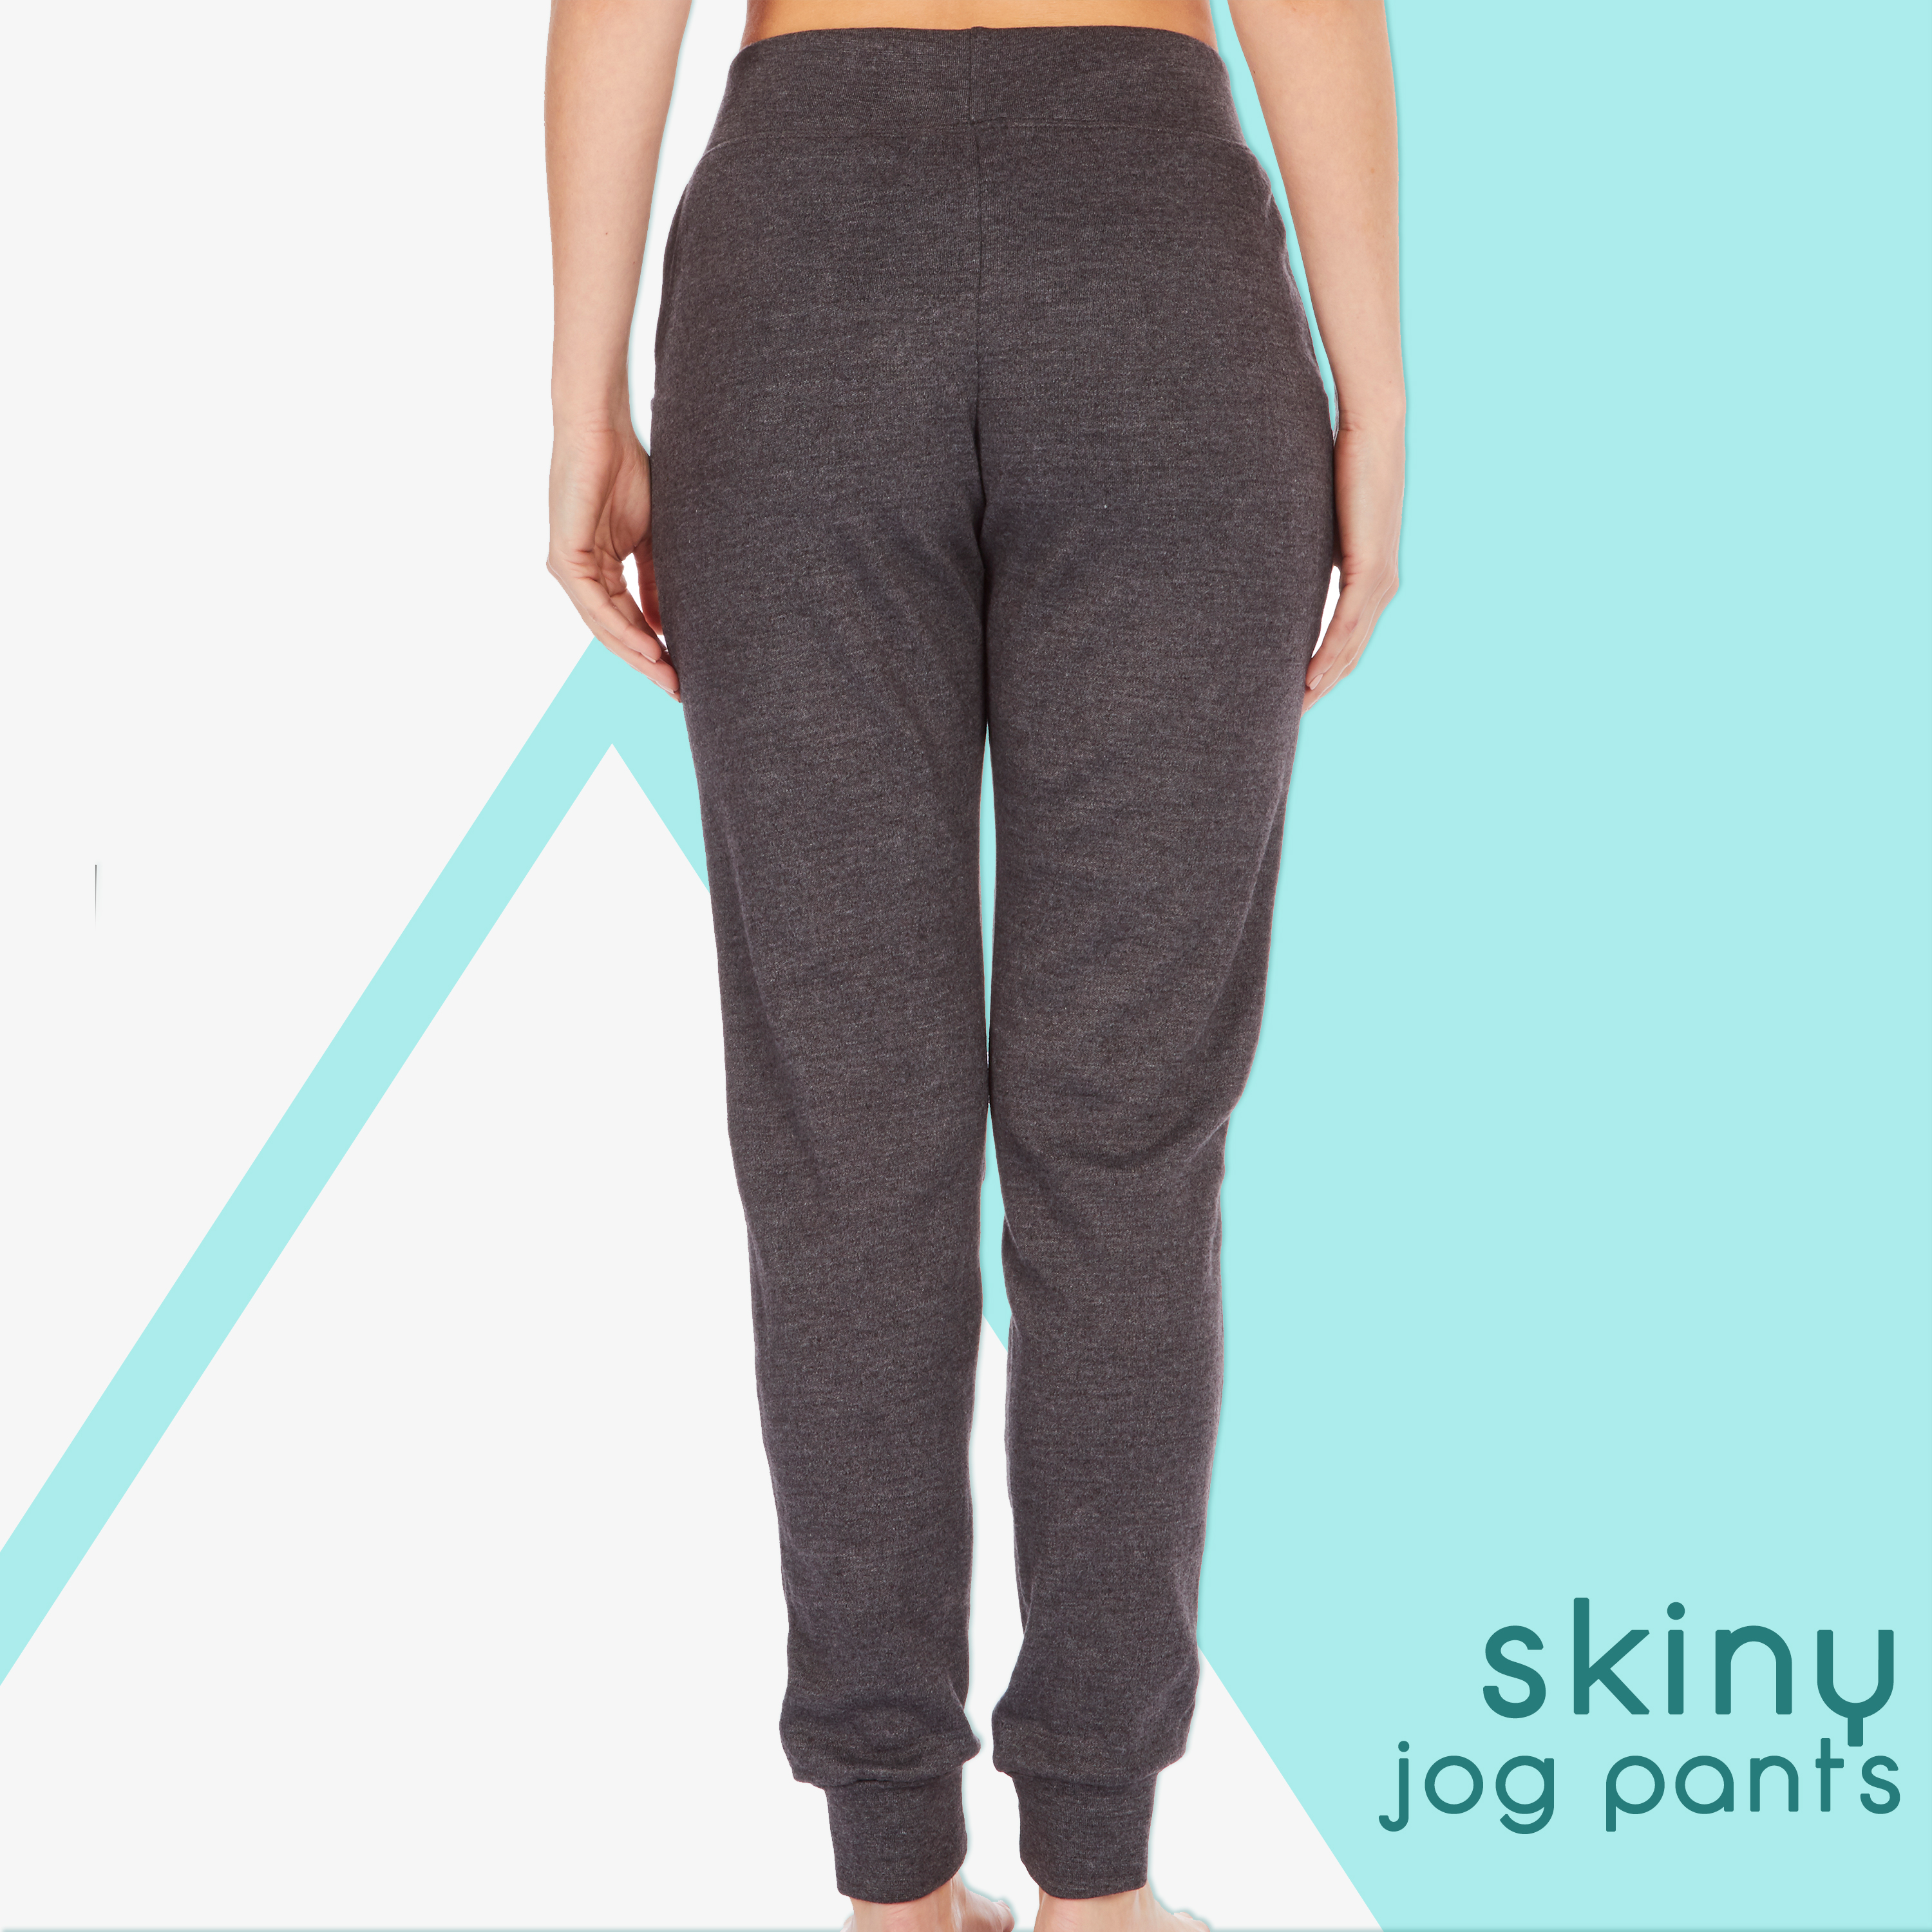 12 Wholesale Ladies Single Jersey Cotton Jogger Pants With Pockets In  Charcoal Gray Size Large - at 